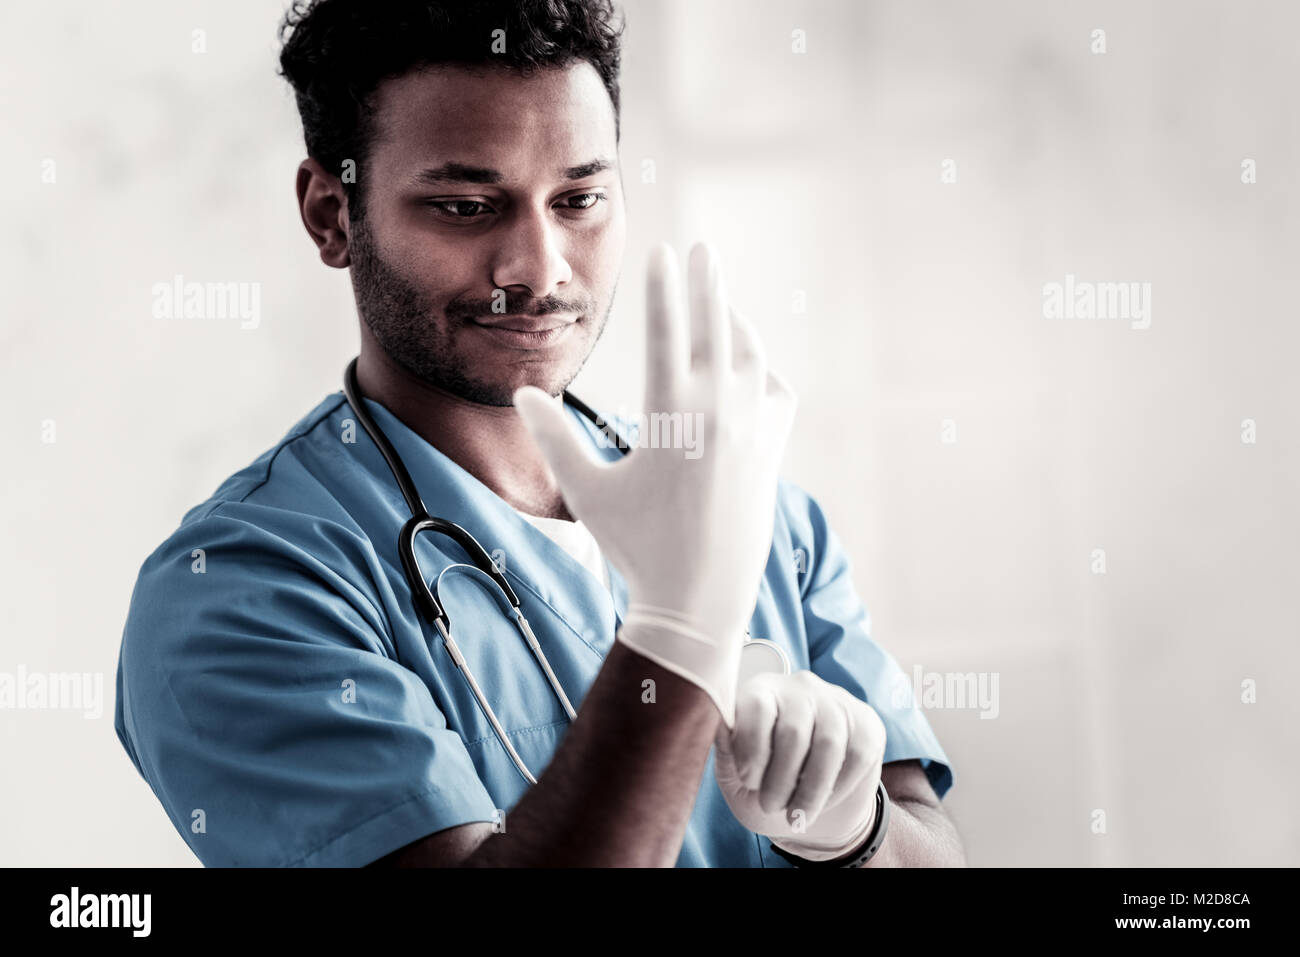 Cheerful doctor preparing for work and putting on gloves Stock Photo